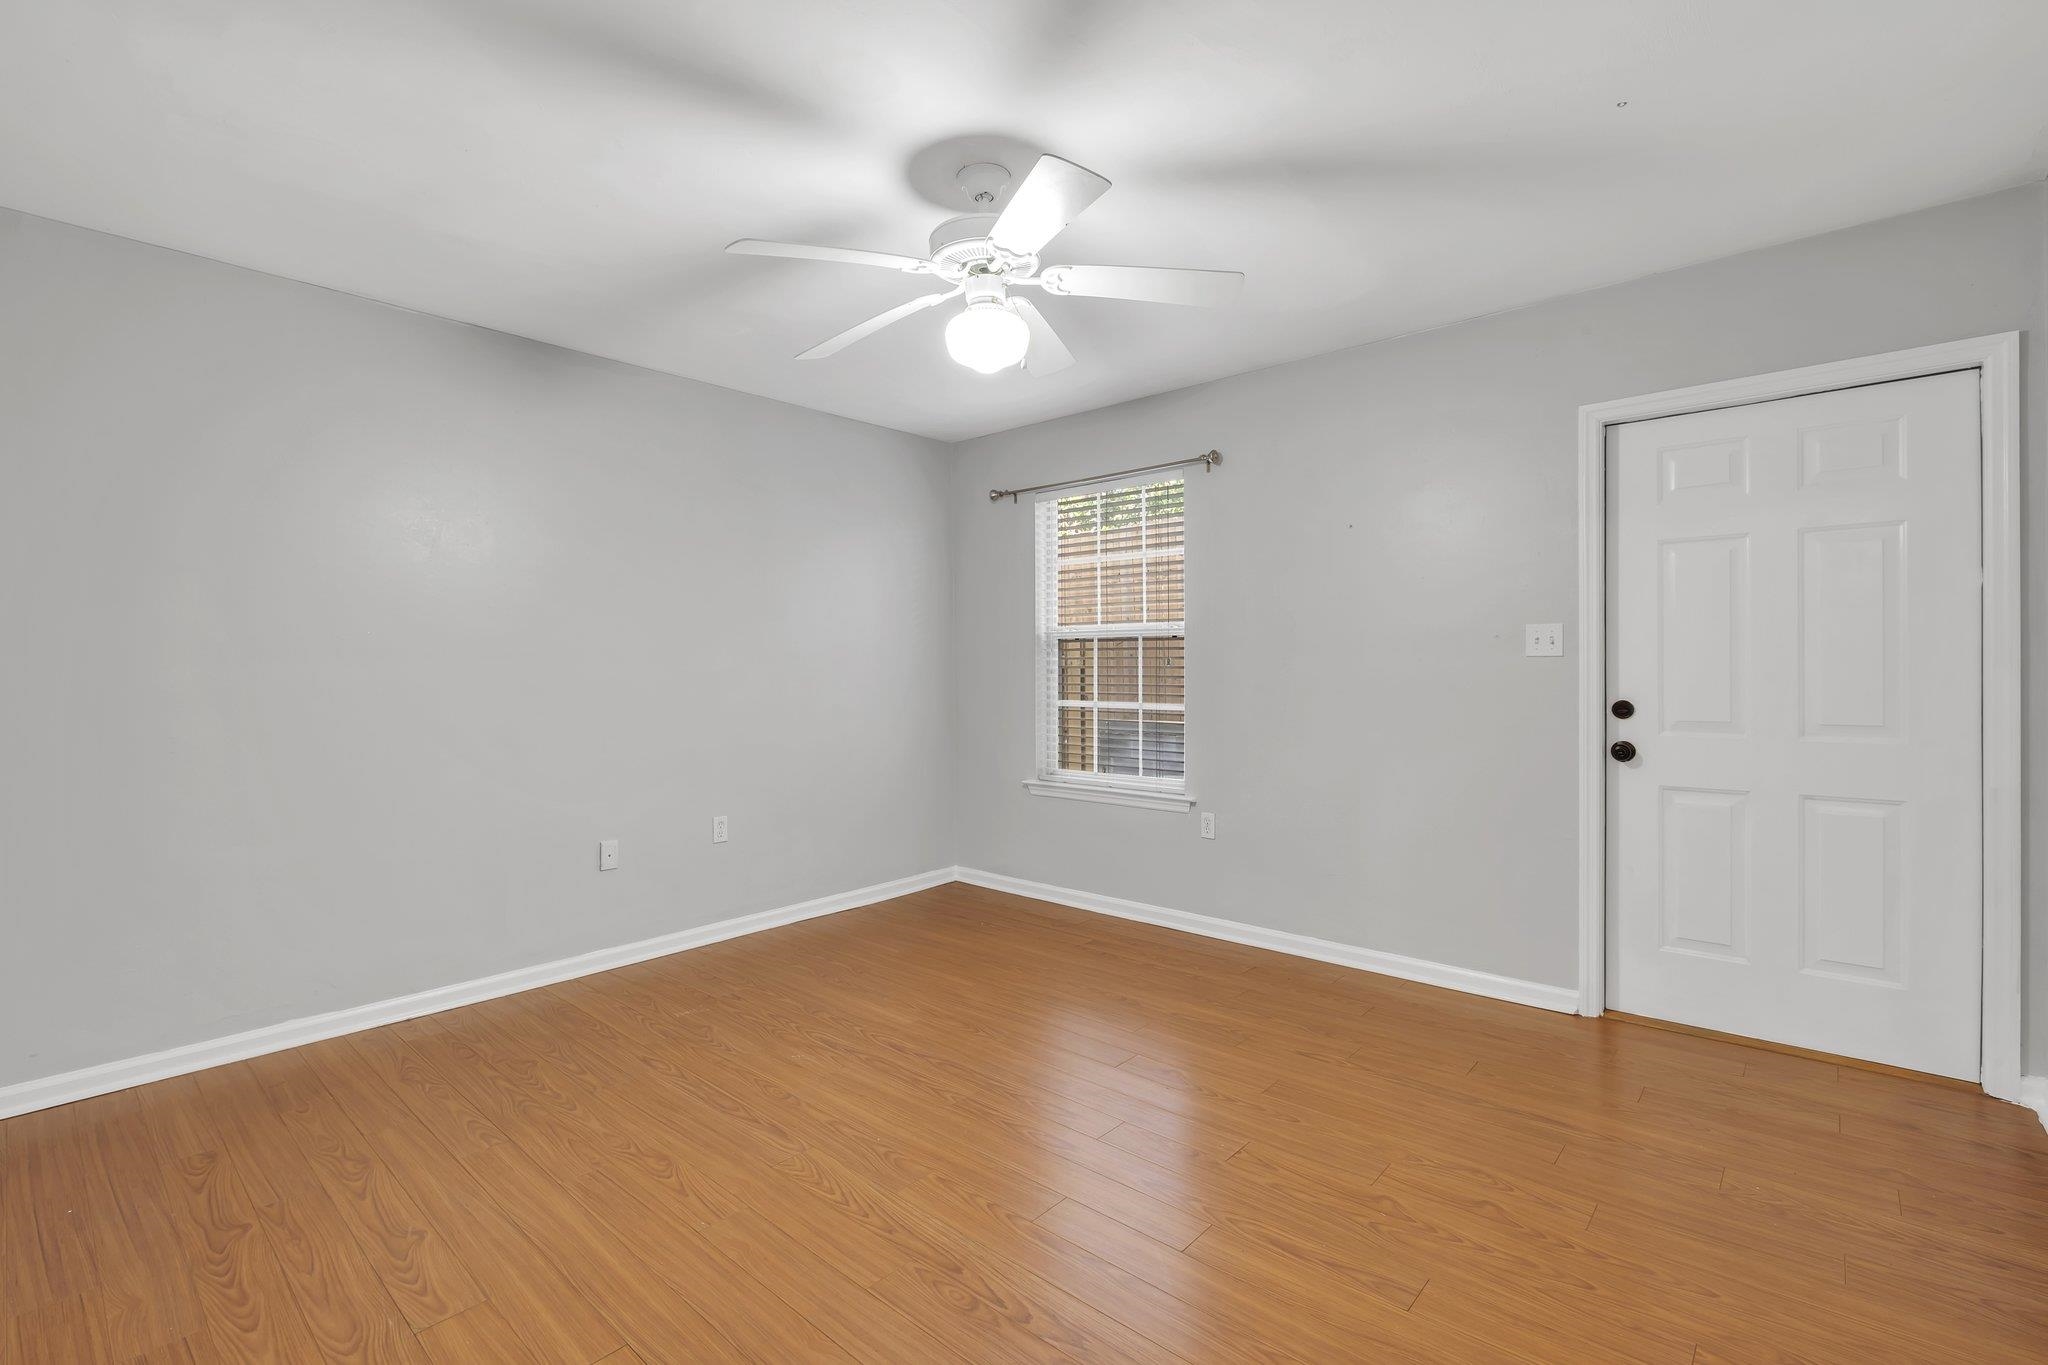 241 Dixie Drive,TALLAHASSEE,Florida 32304,3 Bedrooms Bedrooms,3 BathroomsBathrooms,Condo,241 Dixie Drive,369159